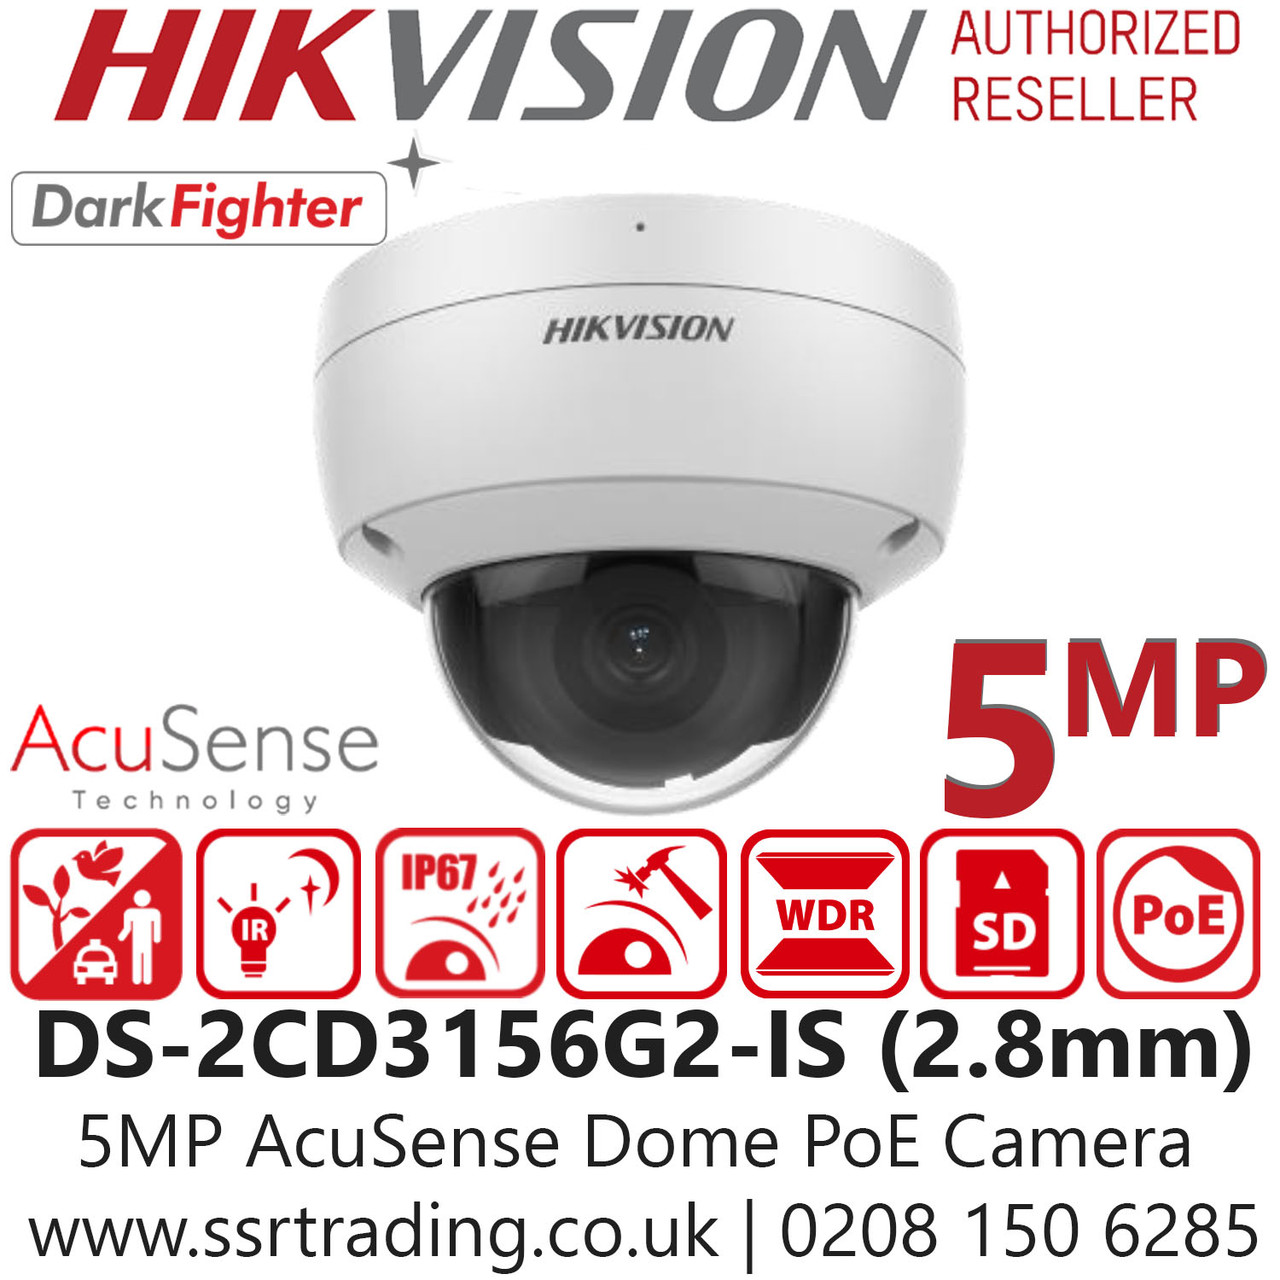 Hikvision 5MP PoE AcuSense Dome Camera - DS-2CD3156G2-IS (2.8mm)